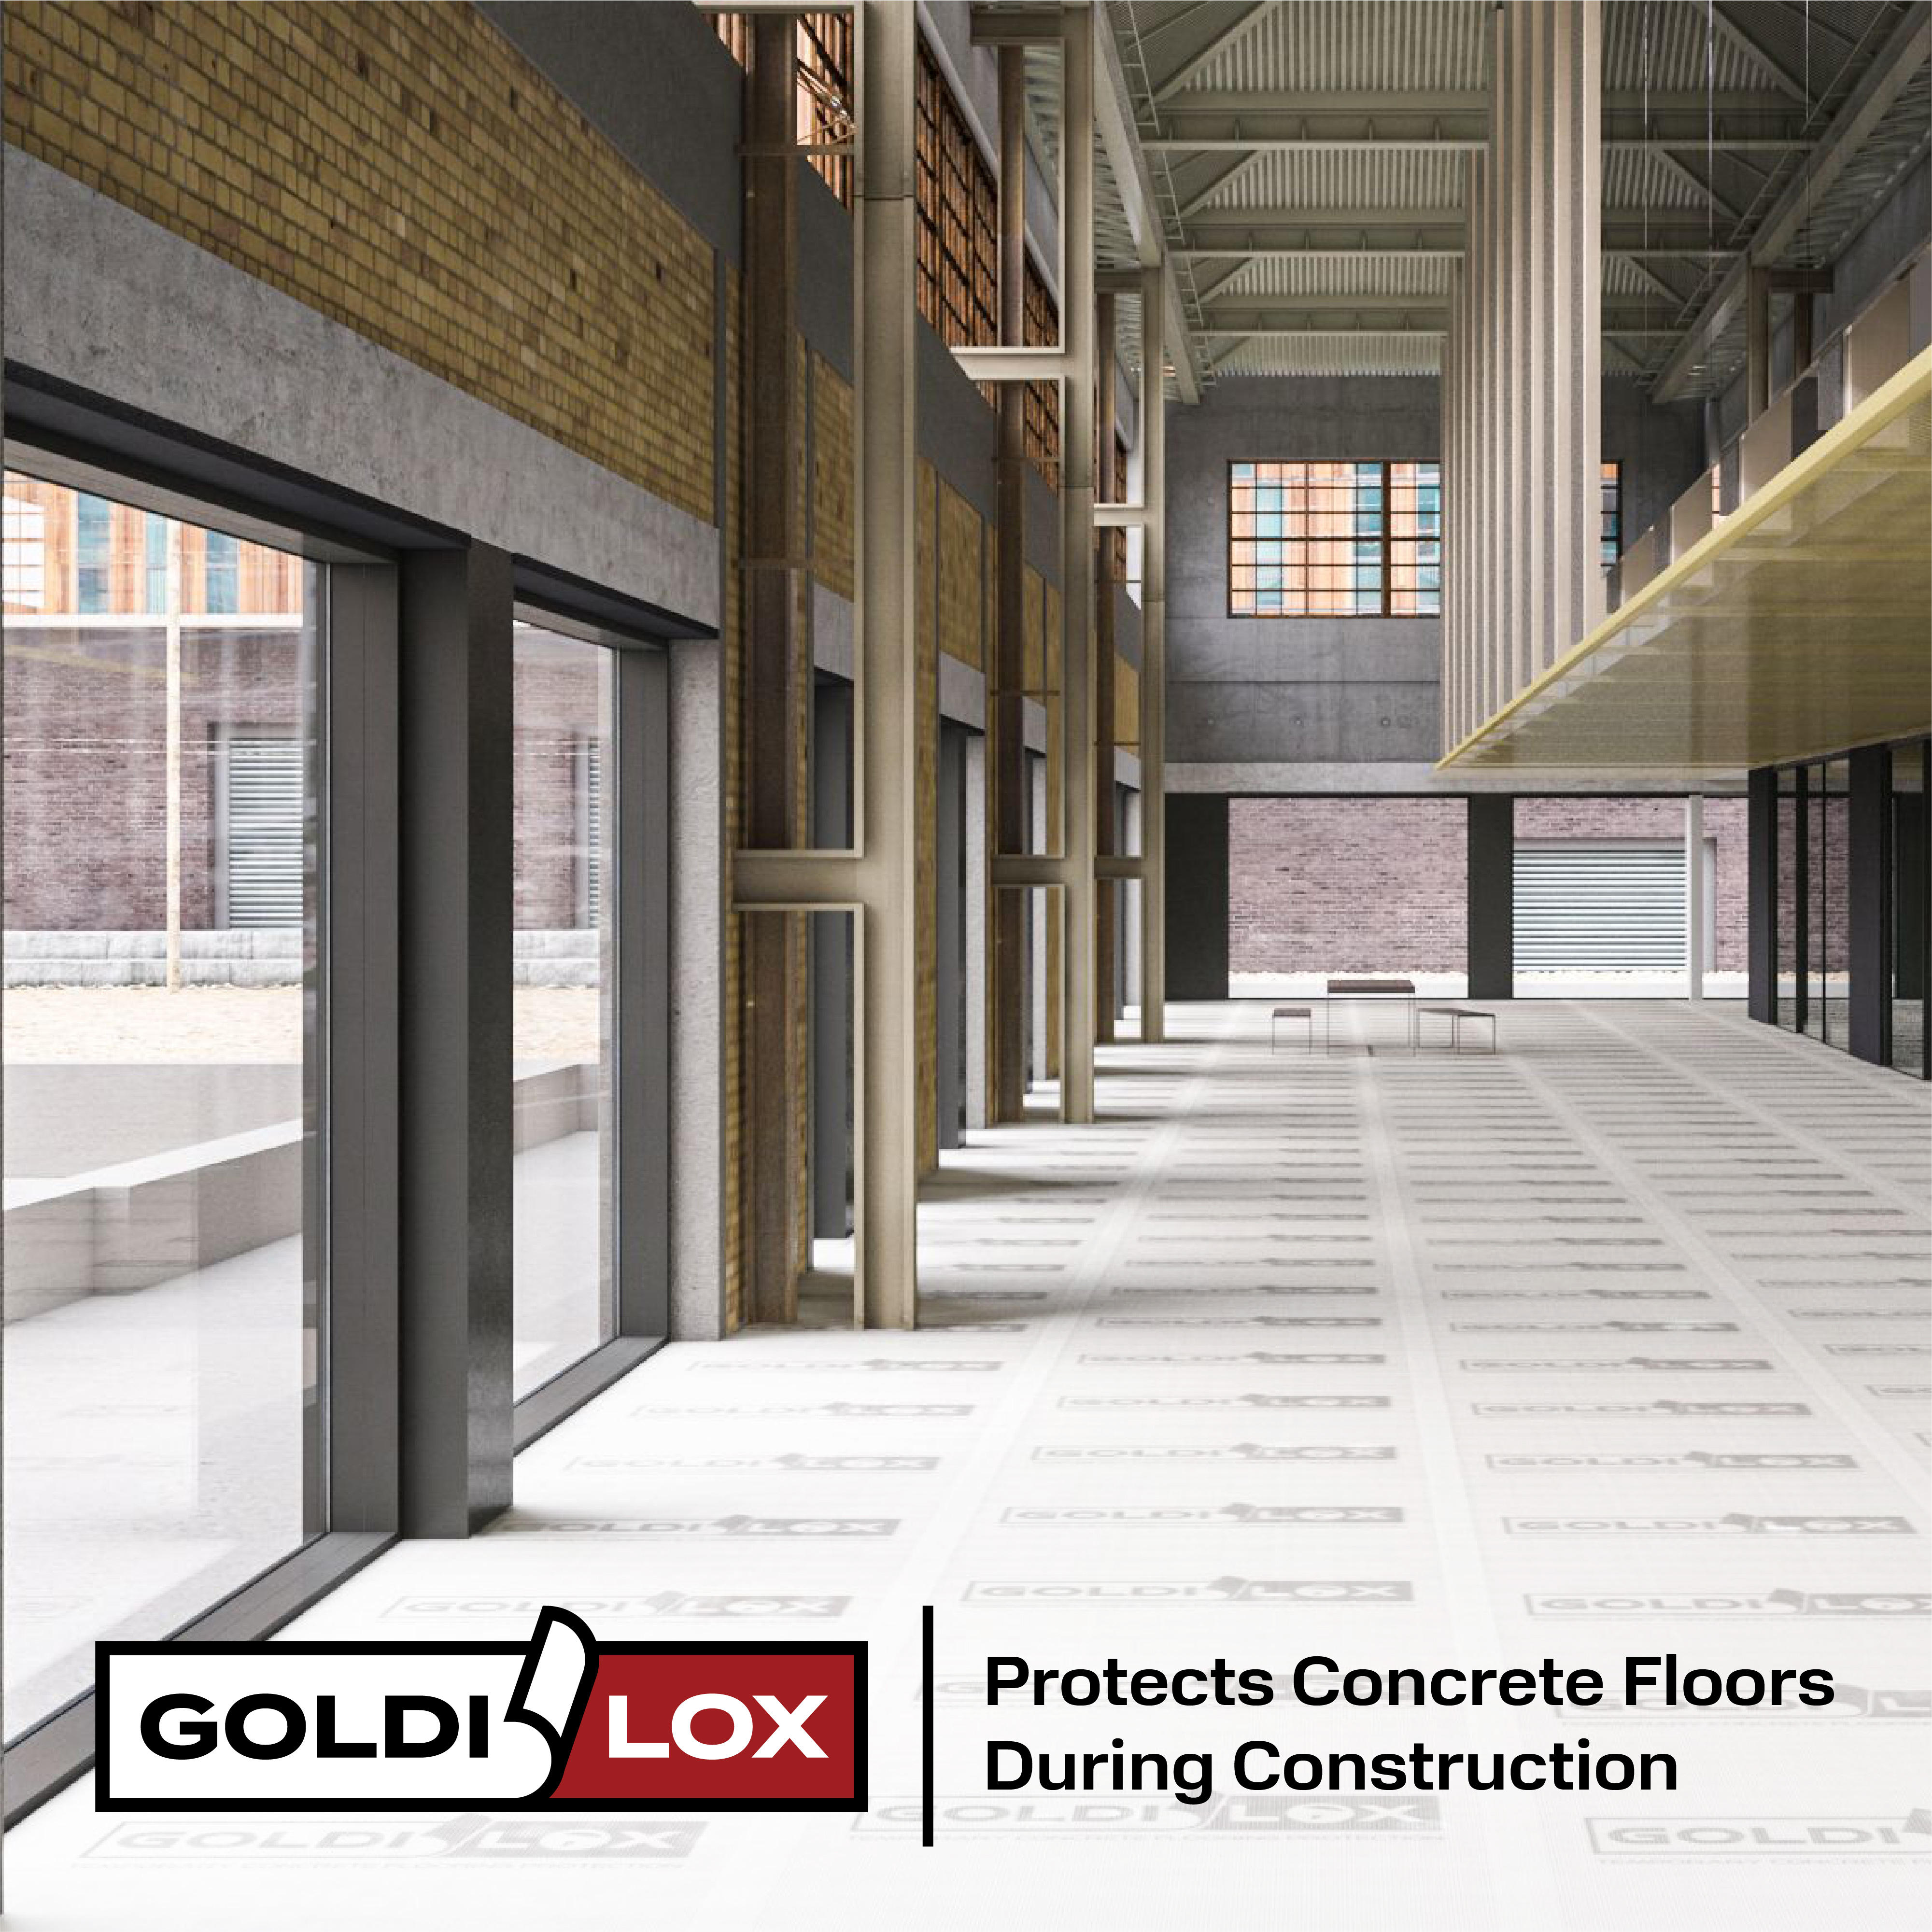 Goldilox Protects Concrete Floors During Construction